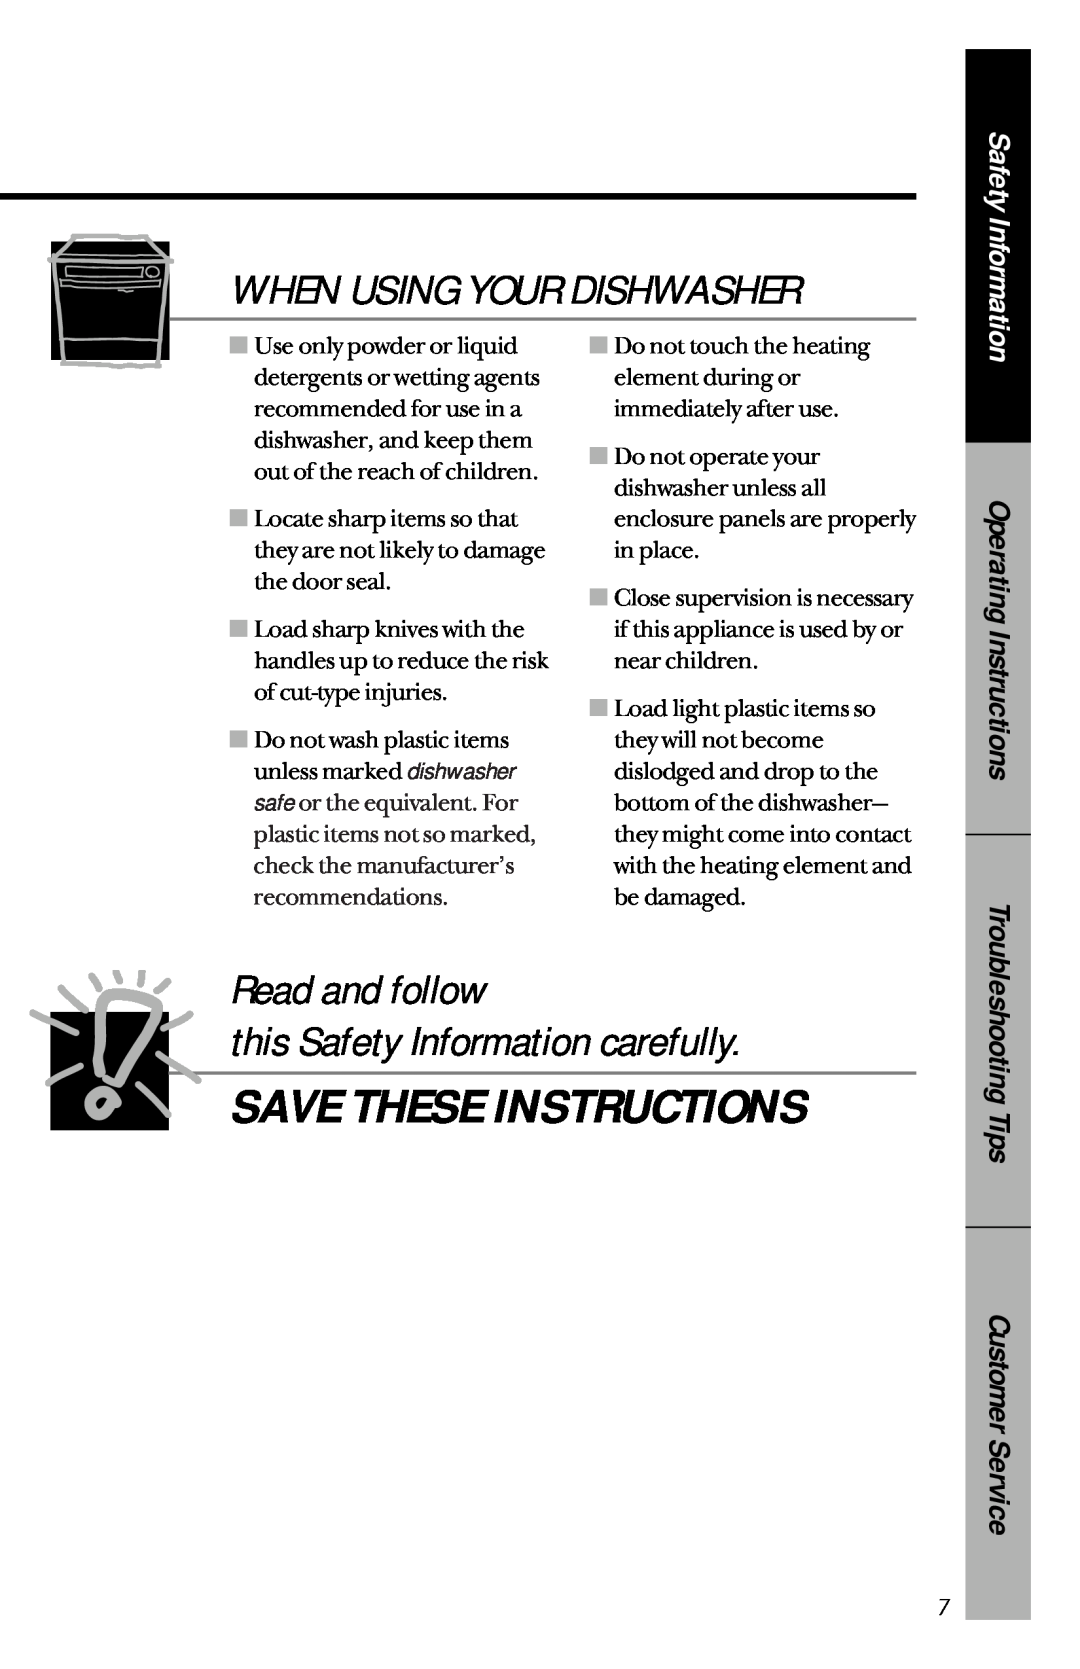 Hotpoint HDA2130 Read and follow this Safety Information carefully, When Using Your Dishwasher, Operating Instructions 